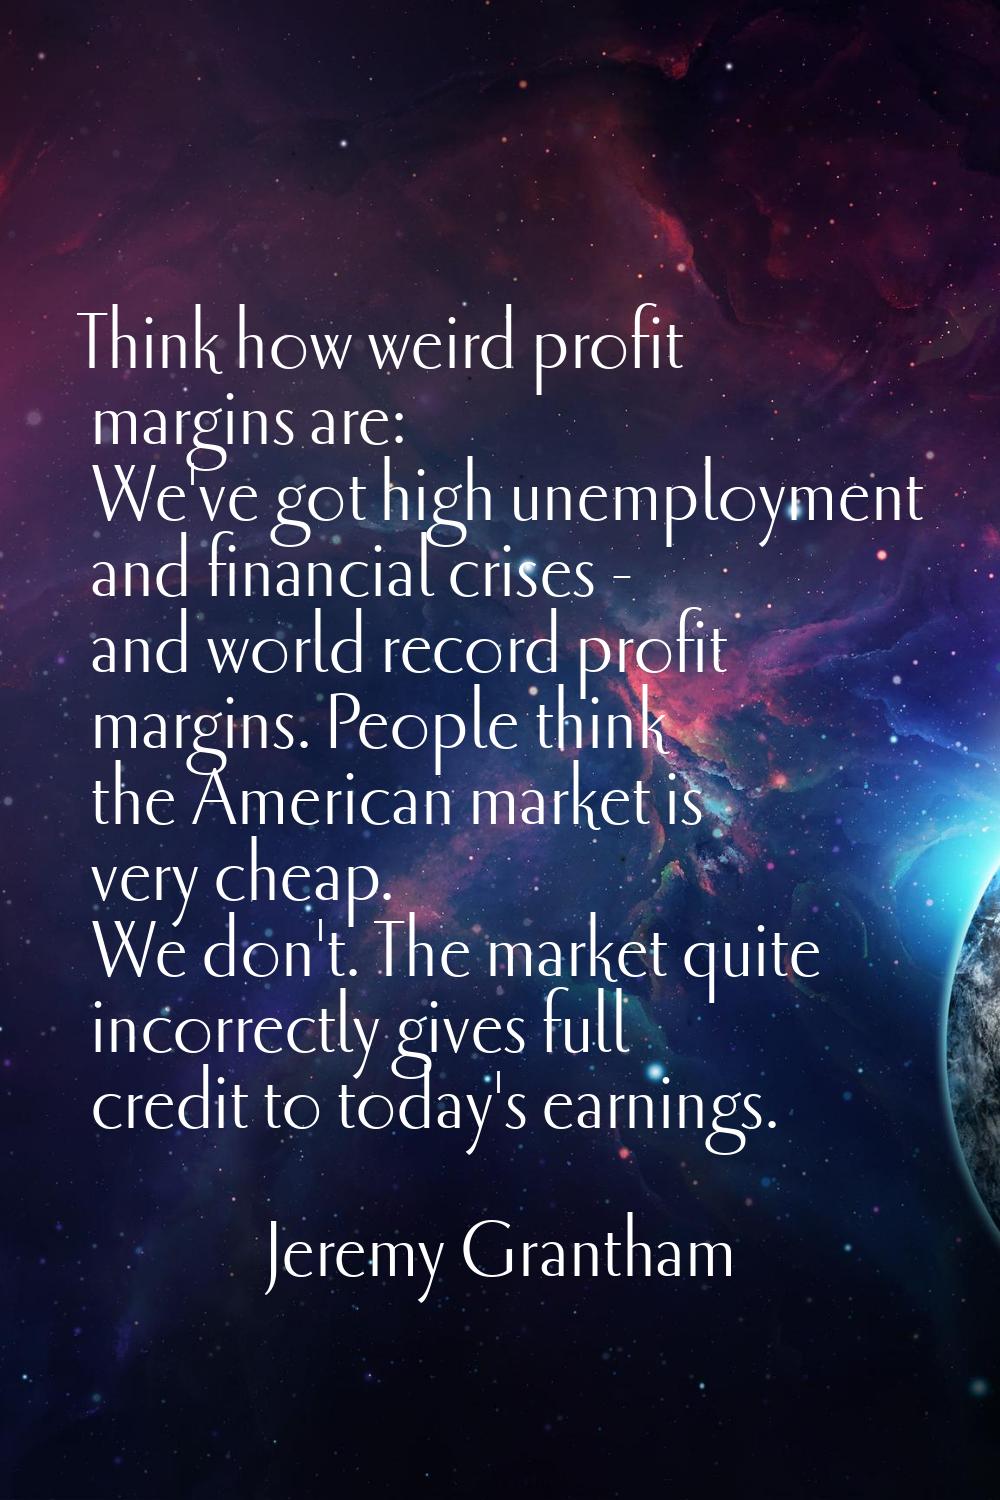 Think how weird profit margins are: We've got high unemployment and financial crises - and world re